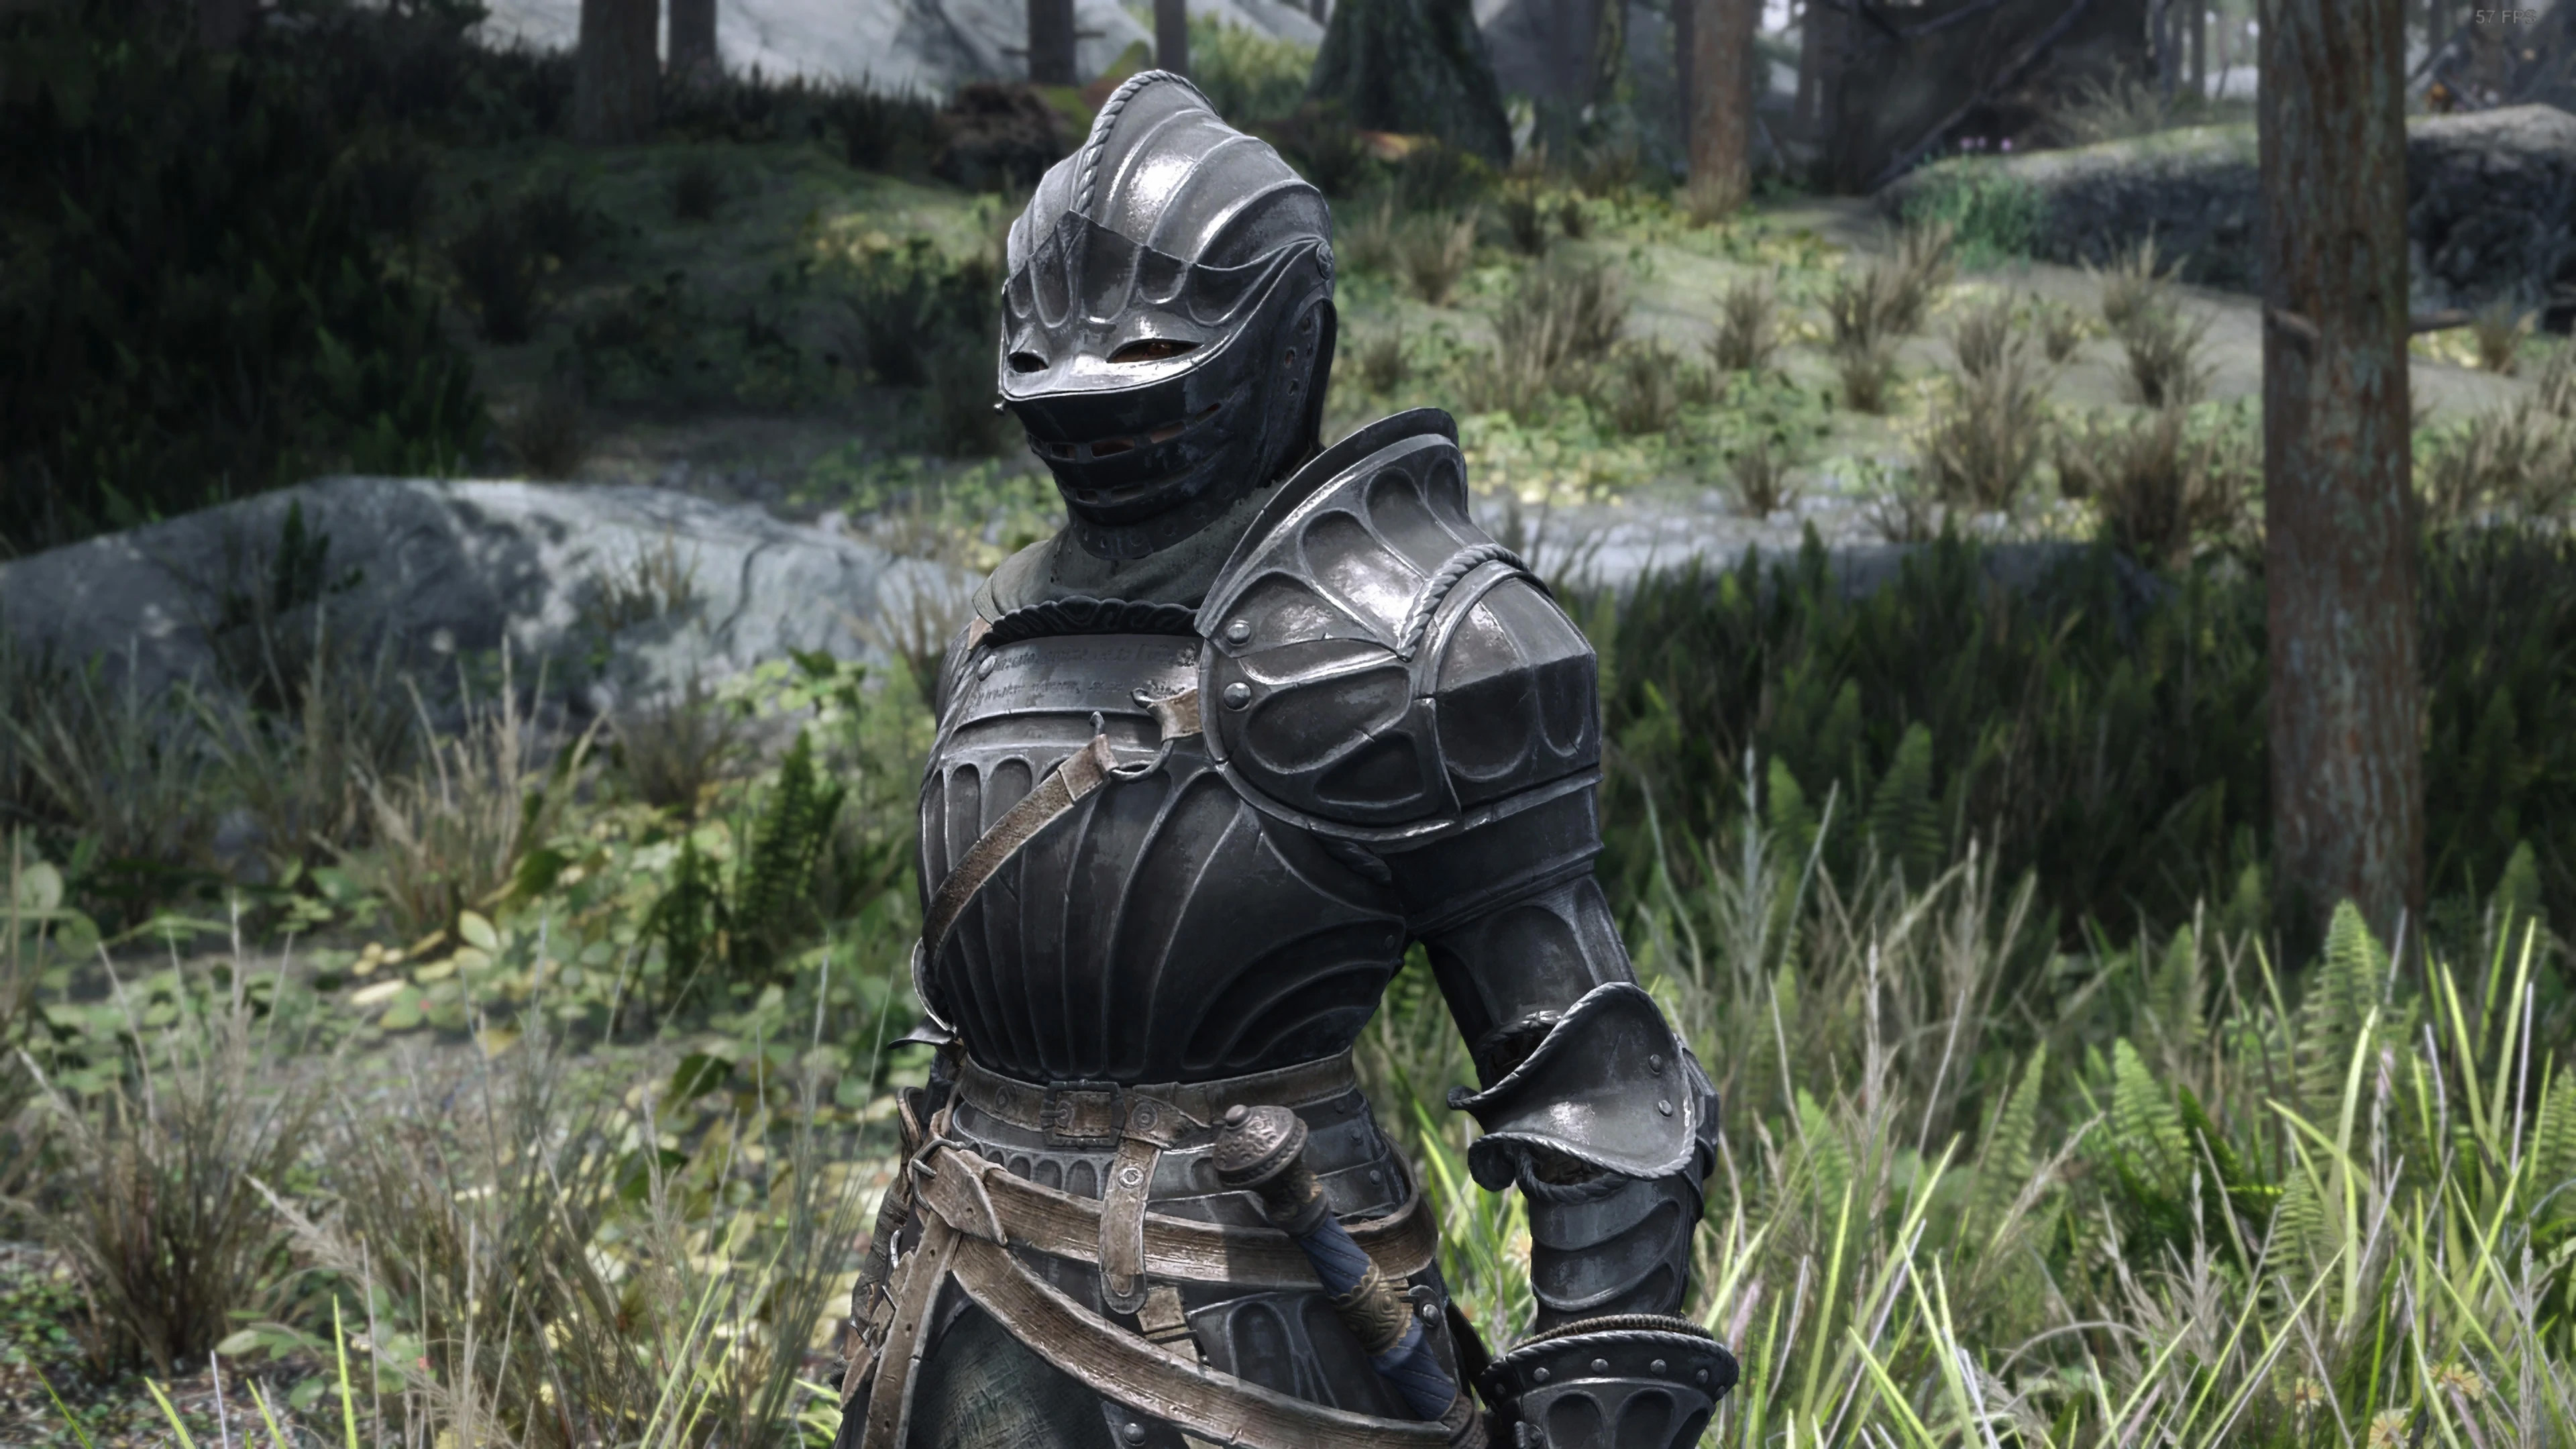 Fluted Armor